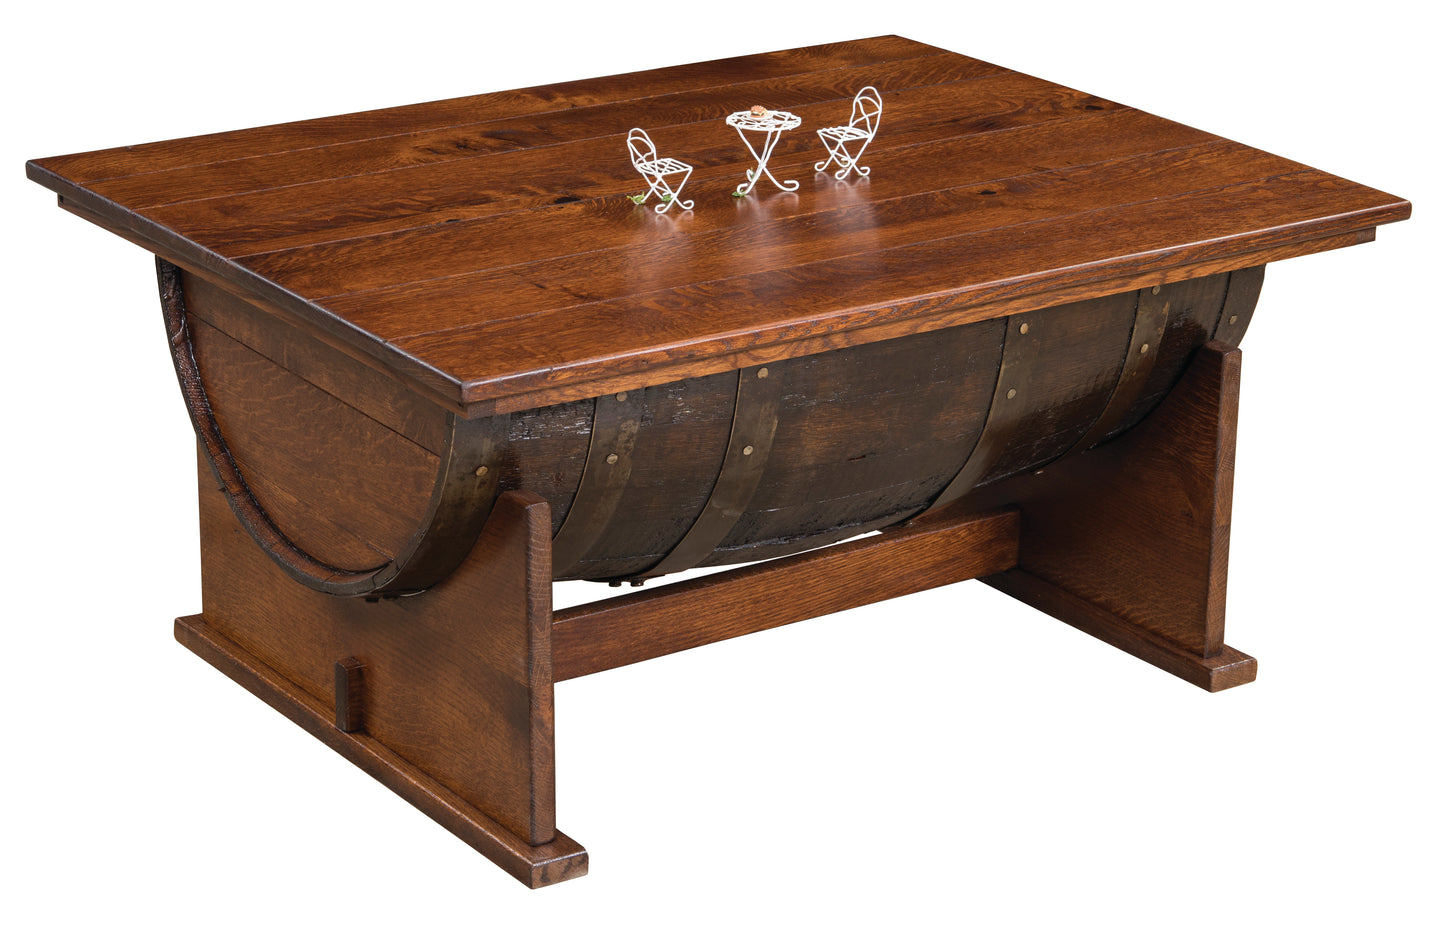 William Sheppee Handcrafted Whiskey Barrel Coffee Table Lift Top Design